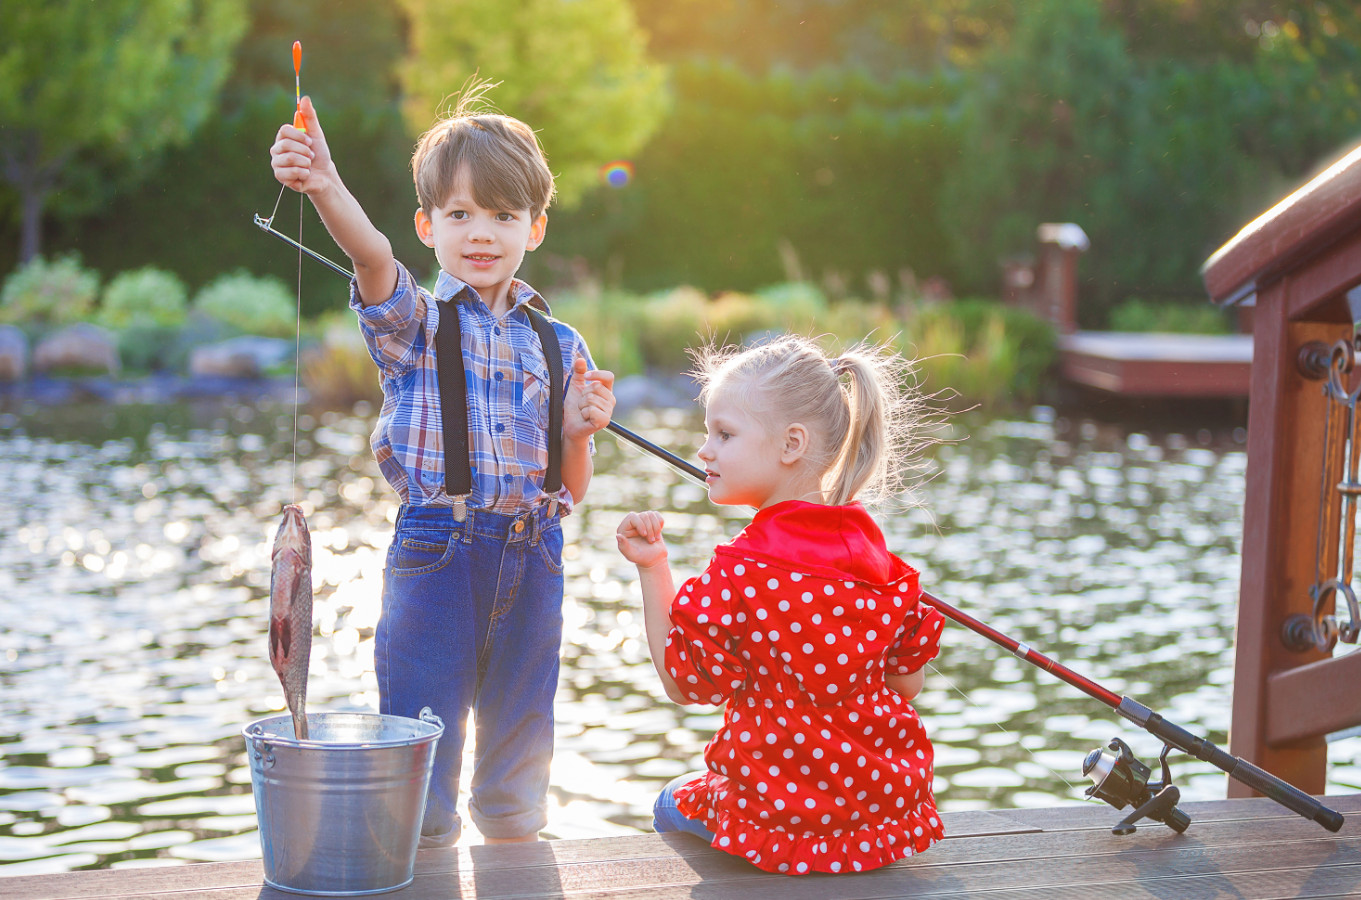 Kids Fishing Equipment Recommendations - Teach Kids and Make Memories